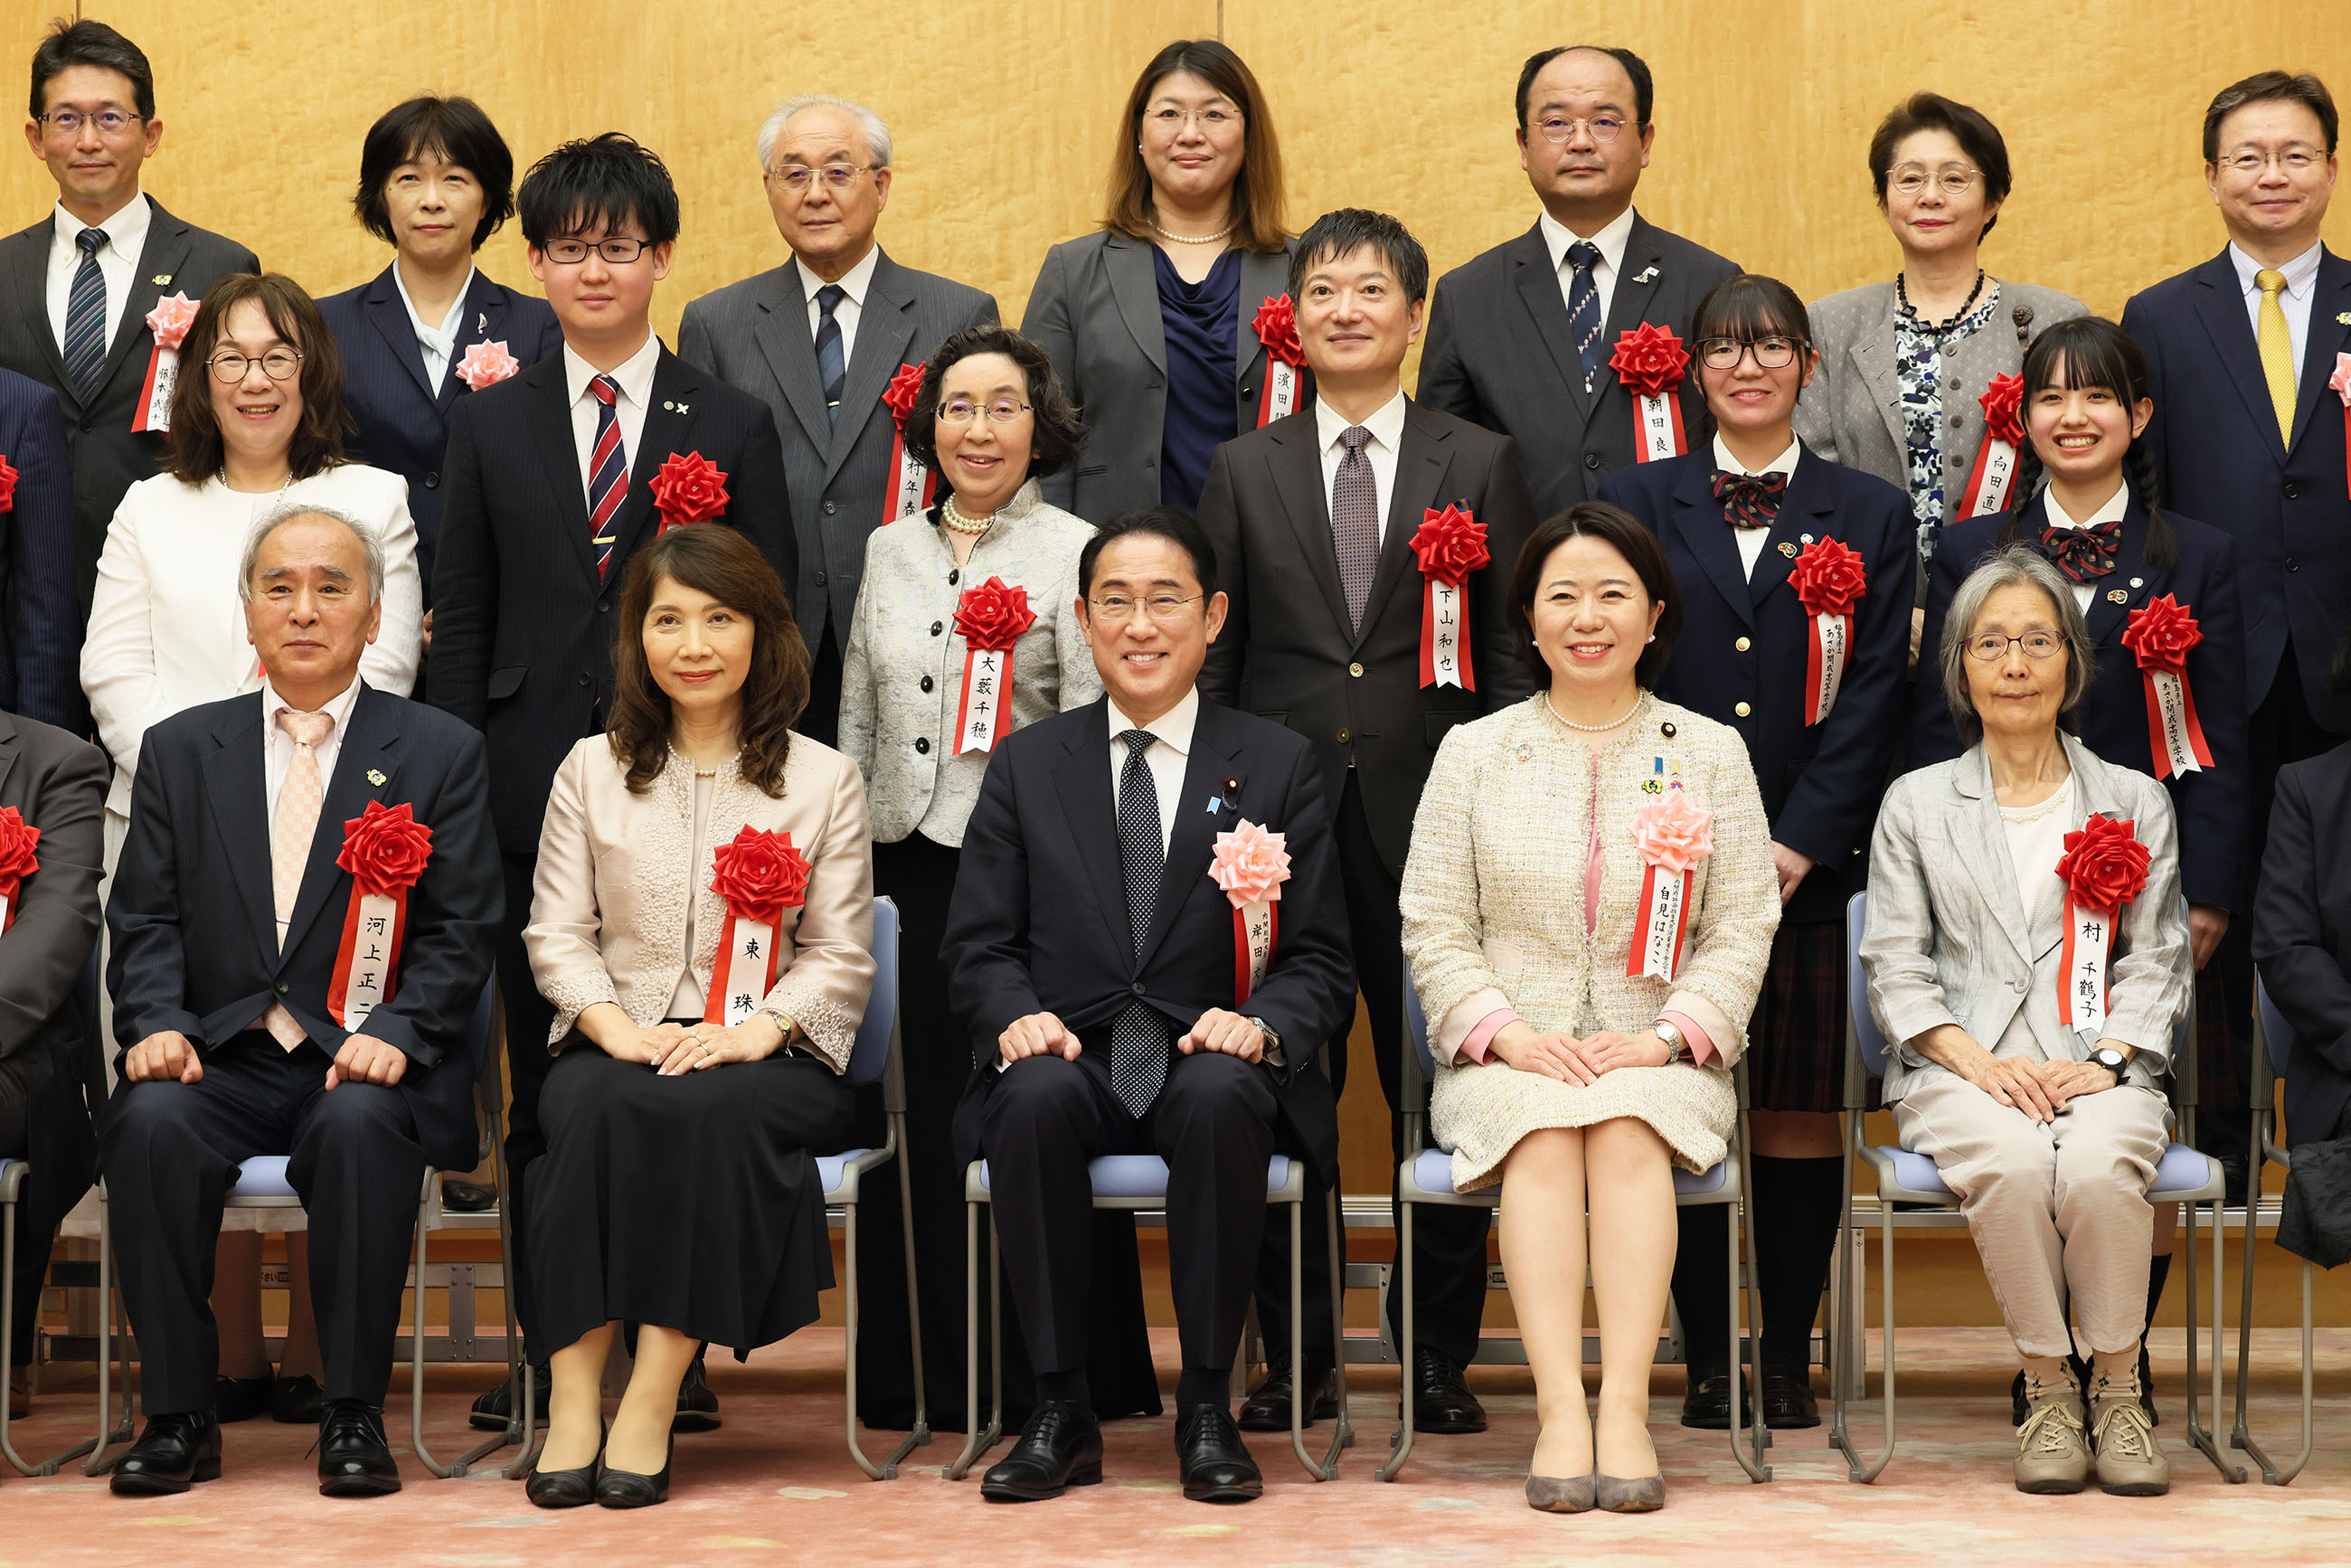 Awards Ceremony to Commend Contributors to the Supporting of Consumers